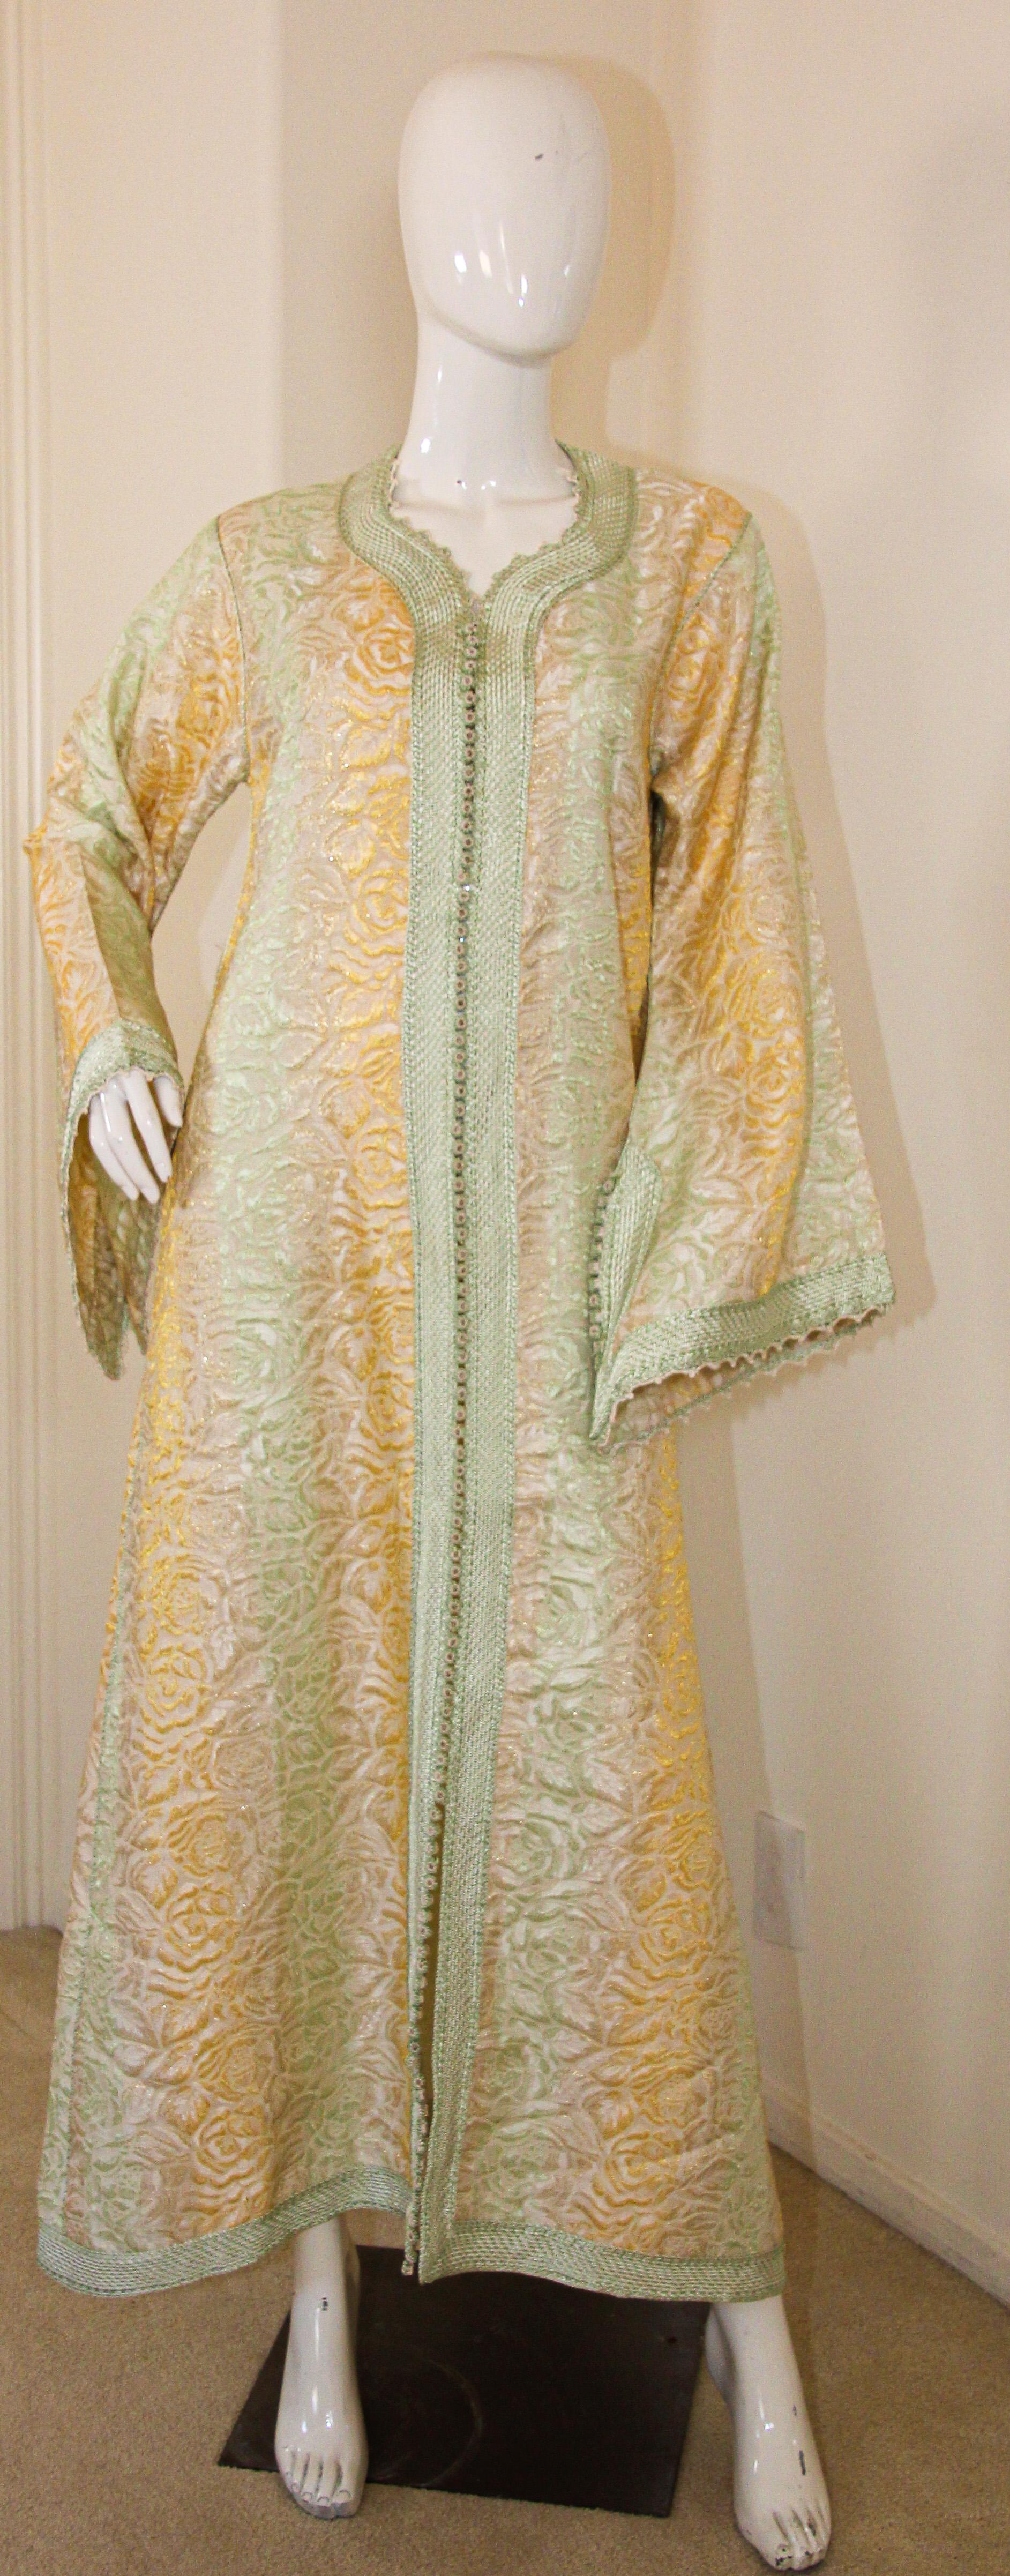 Amazing vintage Moroccan Caftan, gold damask with gold and sage rim threads, Circa 1970's
One of a kind evening antique Moorish gown.
This authentic caftan has been hand-sewn from damask fabric intricately embroidered with silk threads rim.
The